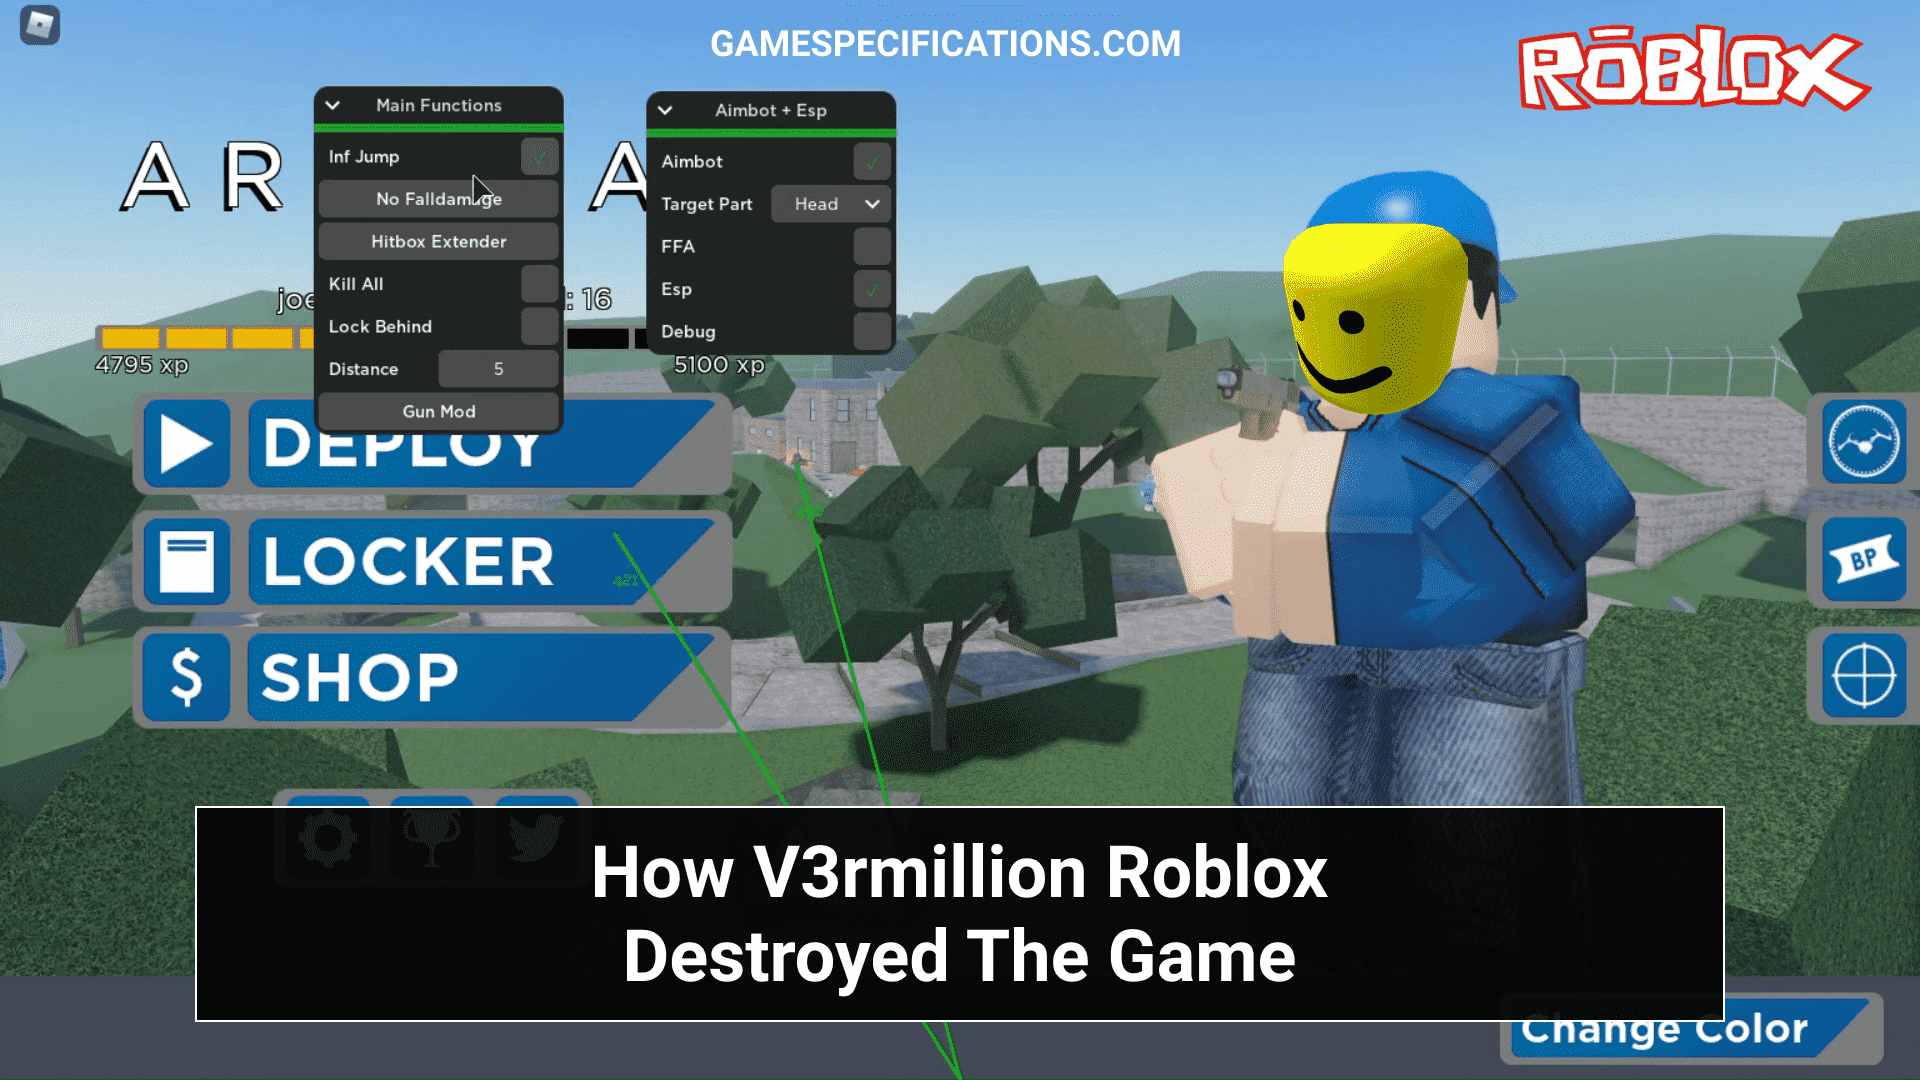 v3rmillion-roblox-breaked-the-game-by-using-powerful-exploits-and-scripts-game-specifications